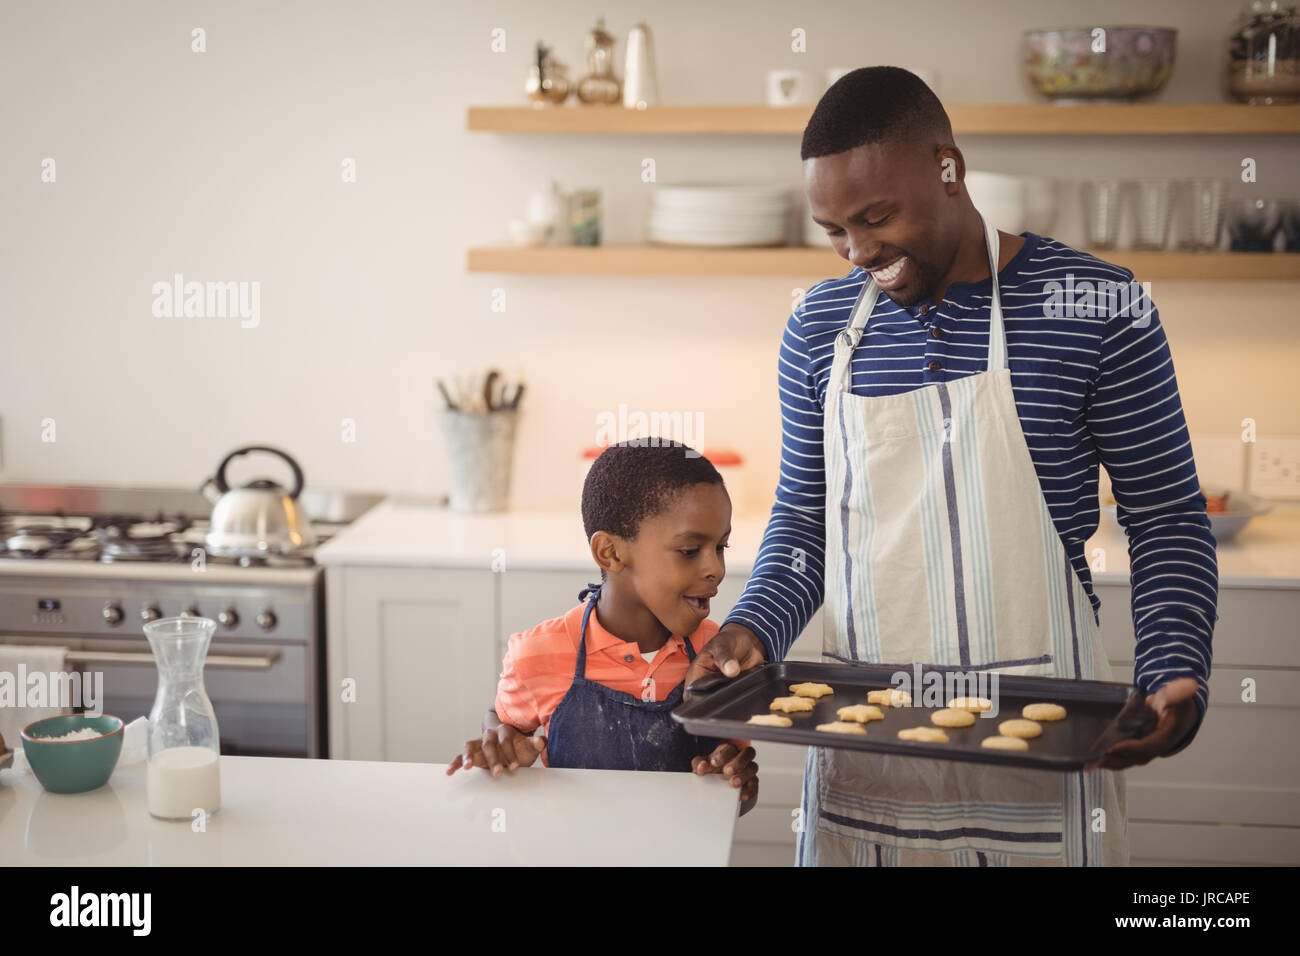 Smiling father holding tray while son looking at cookies Stock Photo